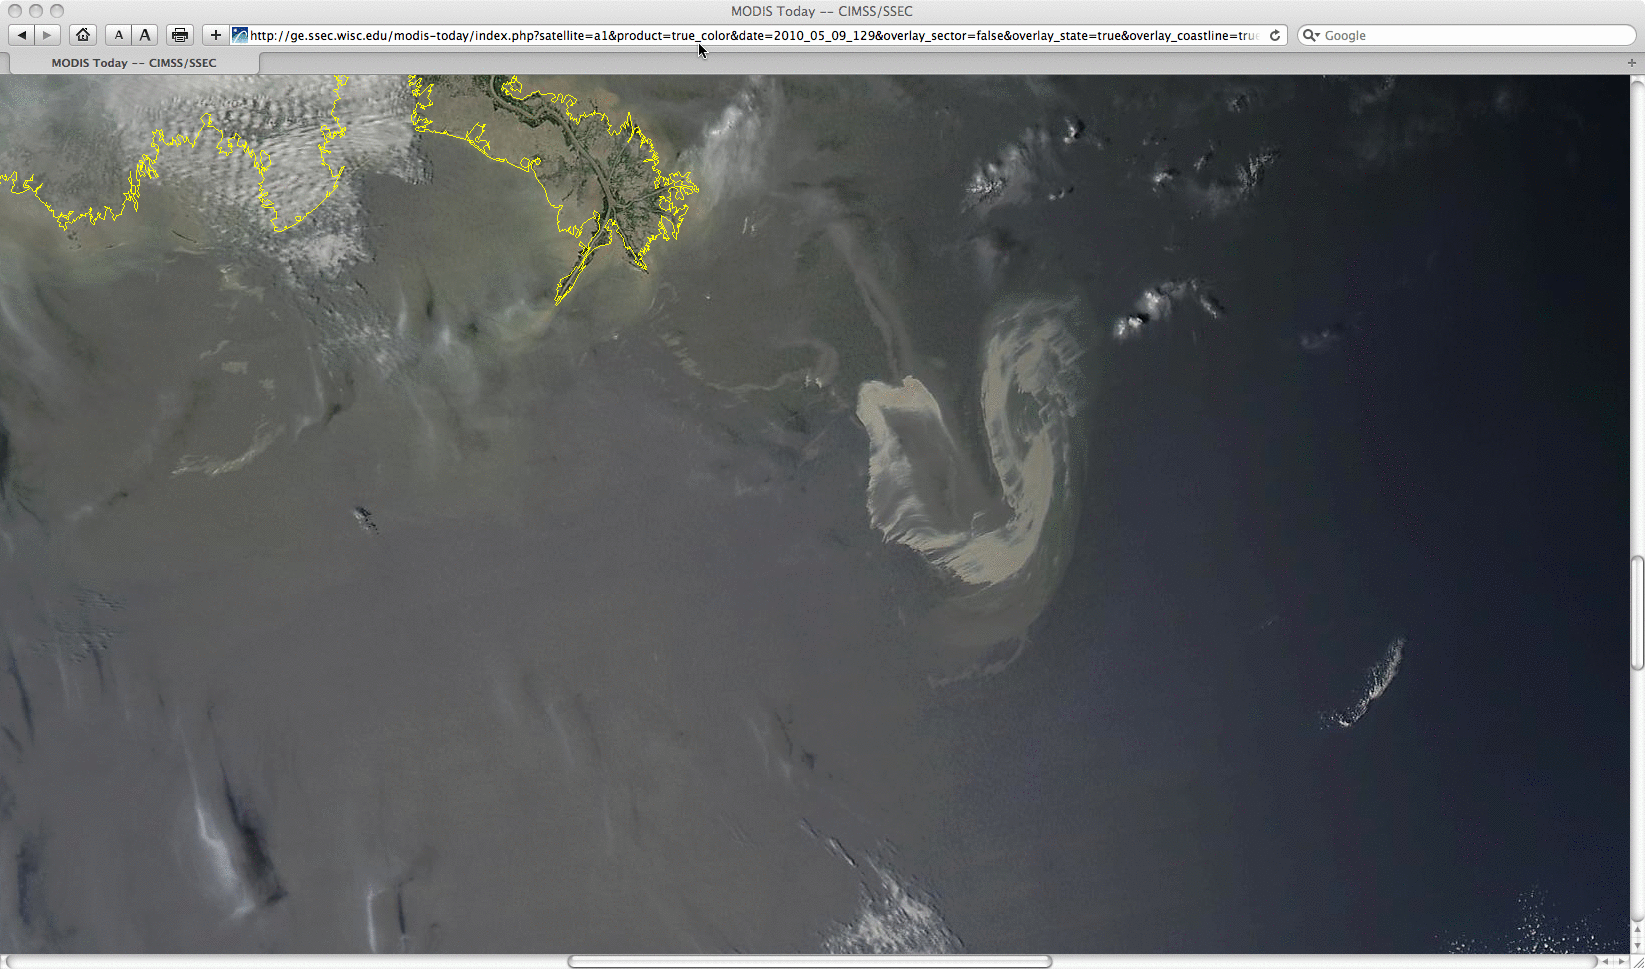 MODIS true color (bands 1/4/3) and false color (bands 7/2/1) Red/Green/Blue (RGB) images